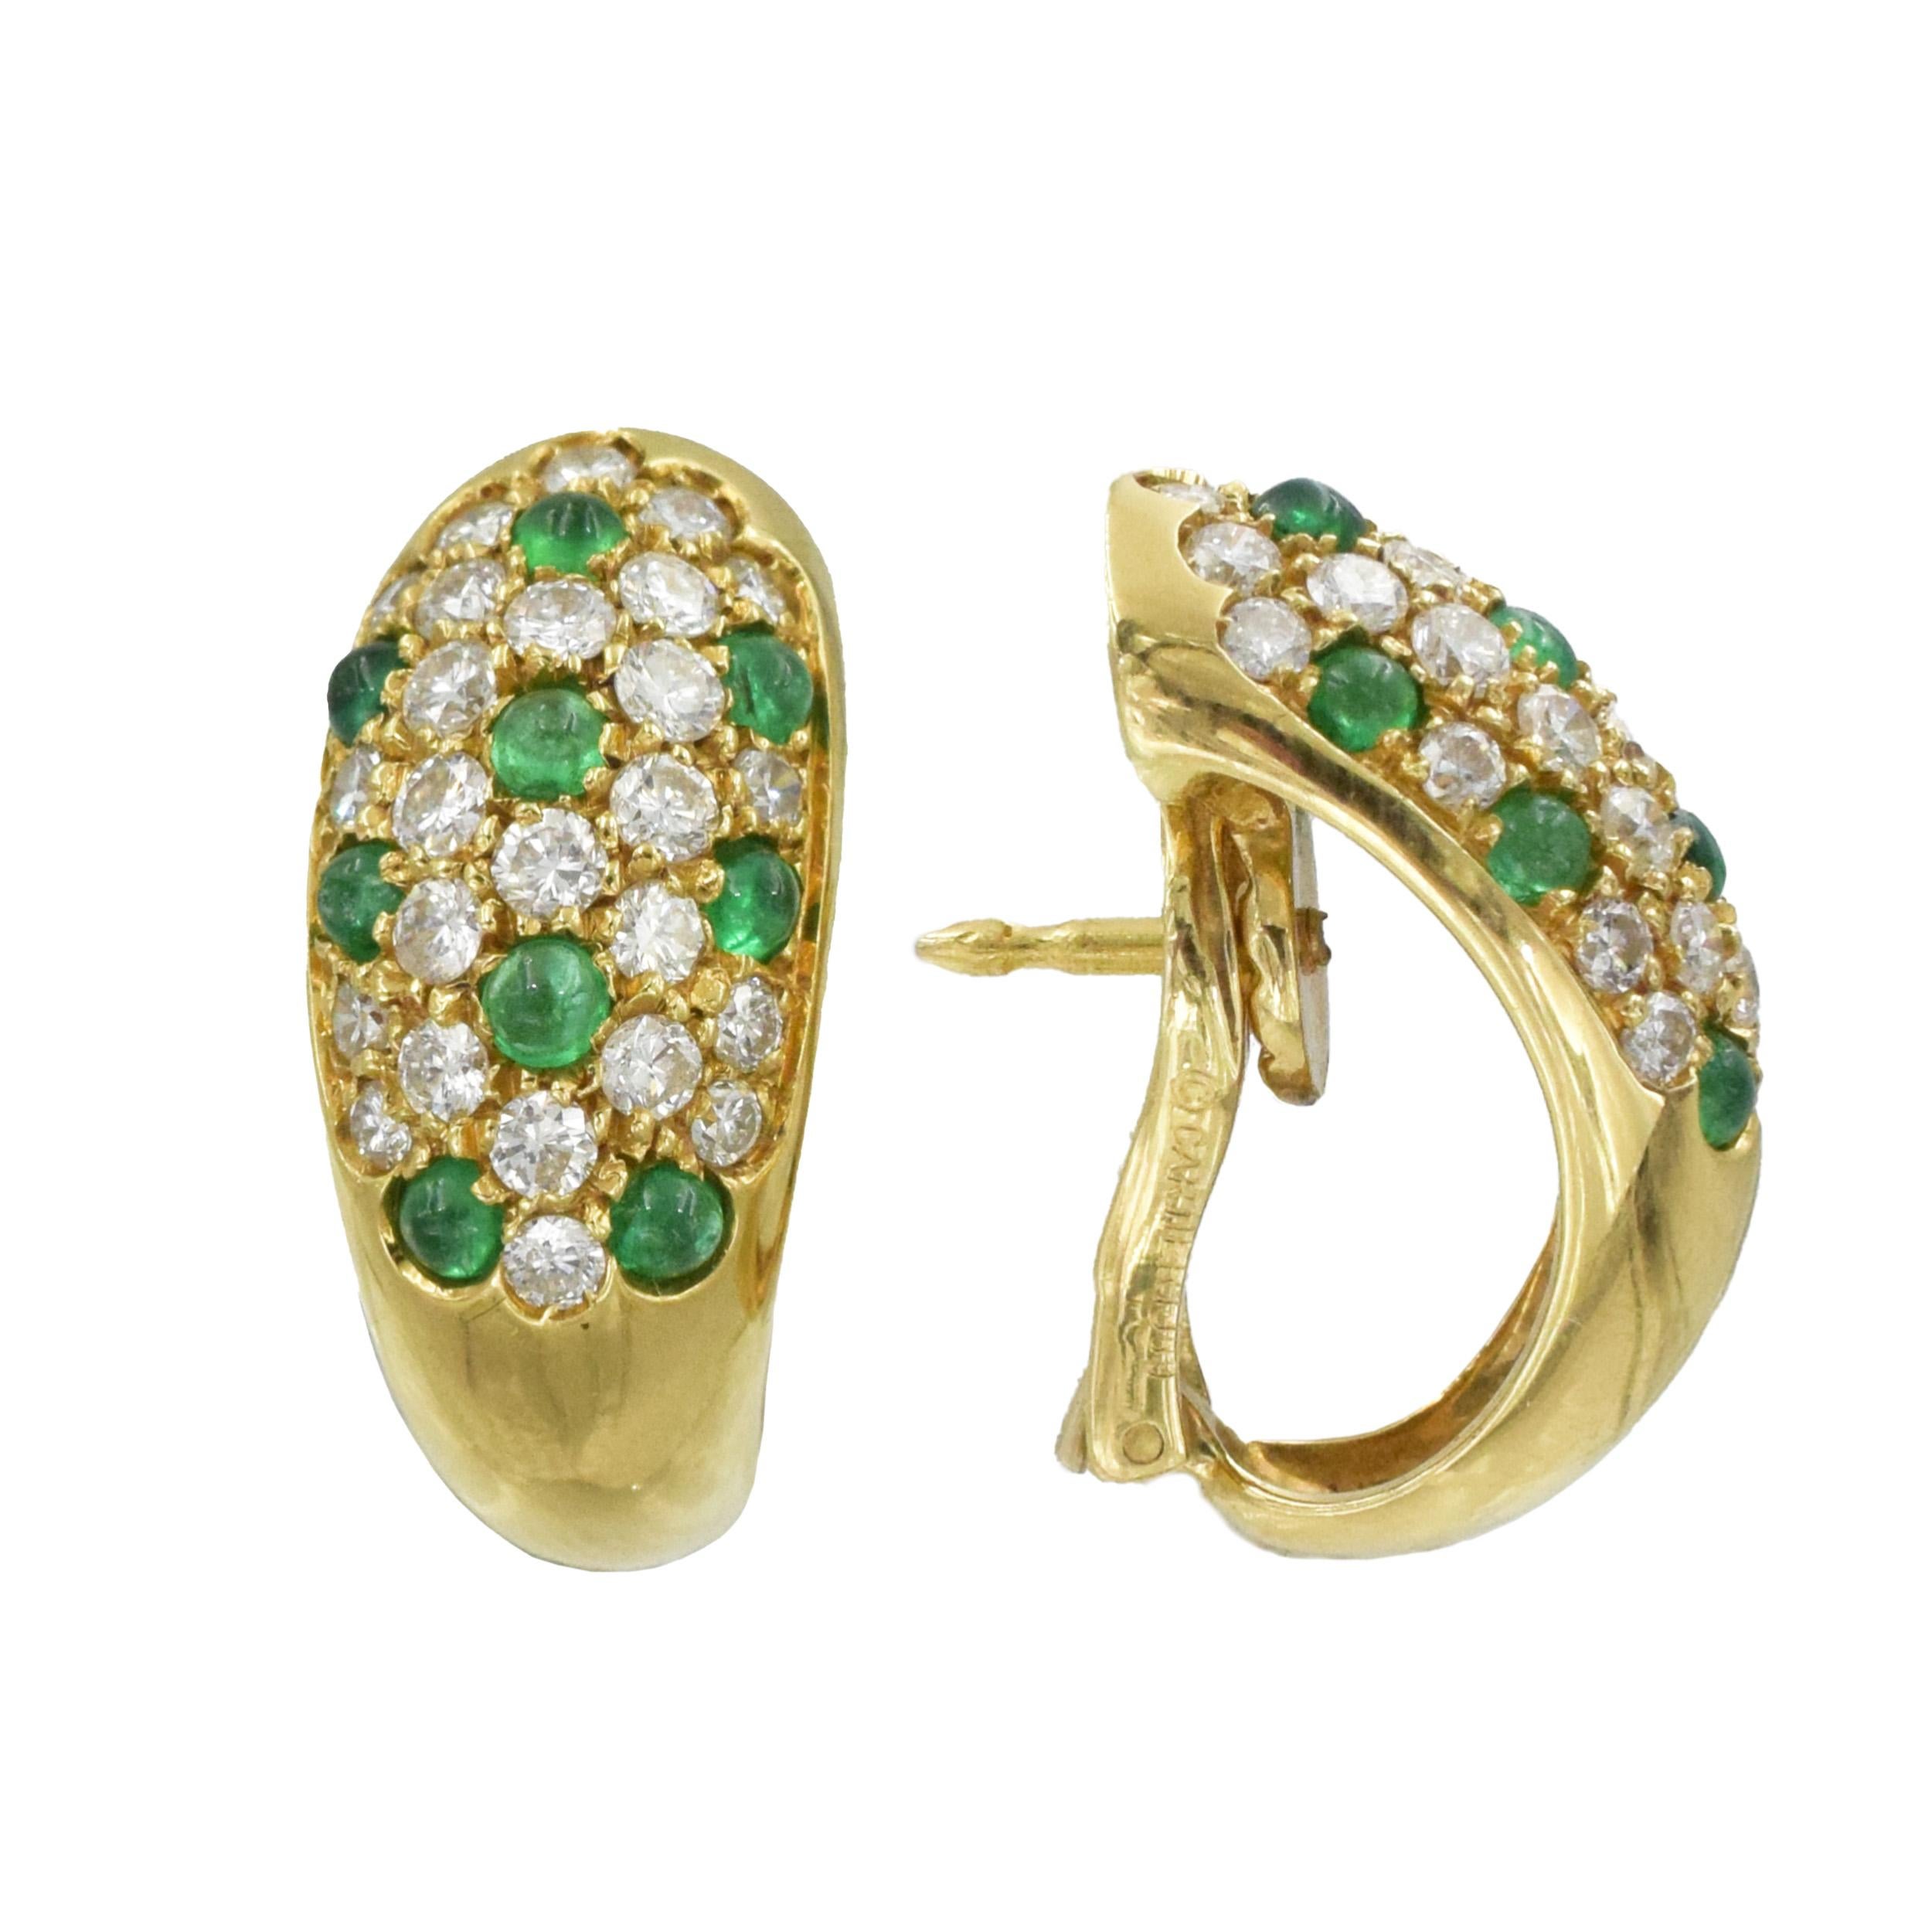 Cartier Diamond and Emerald Earrings and Ring Set For Sale 1